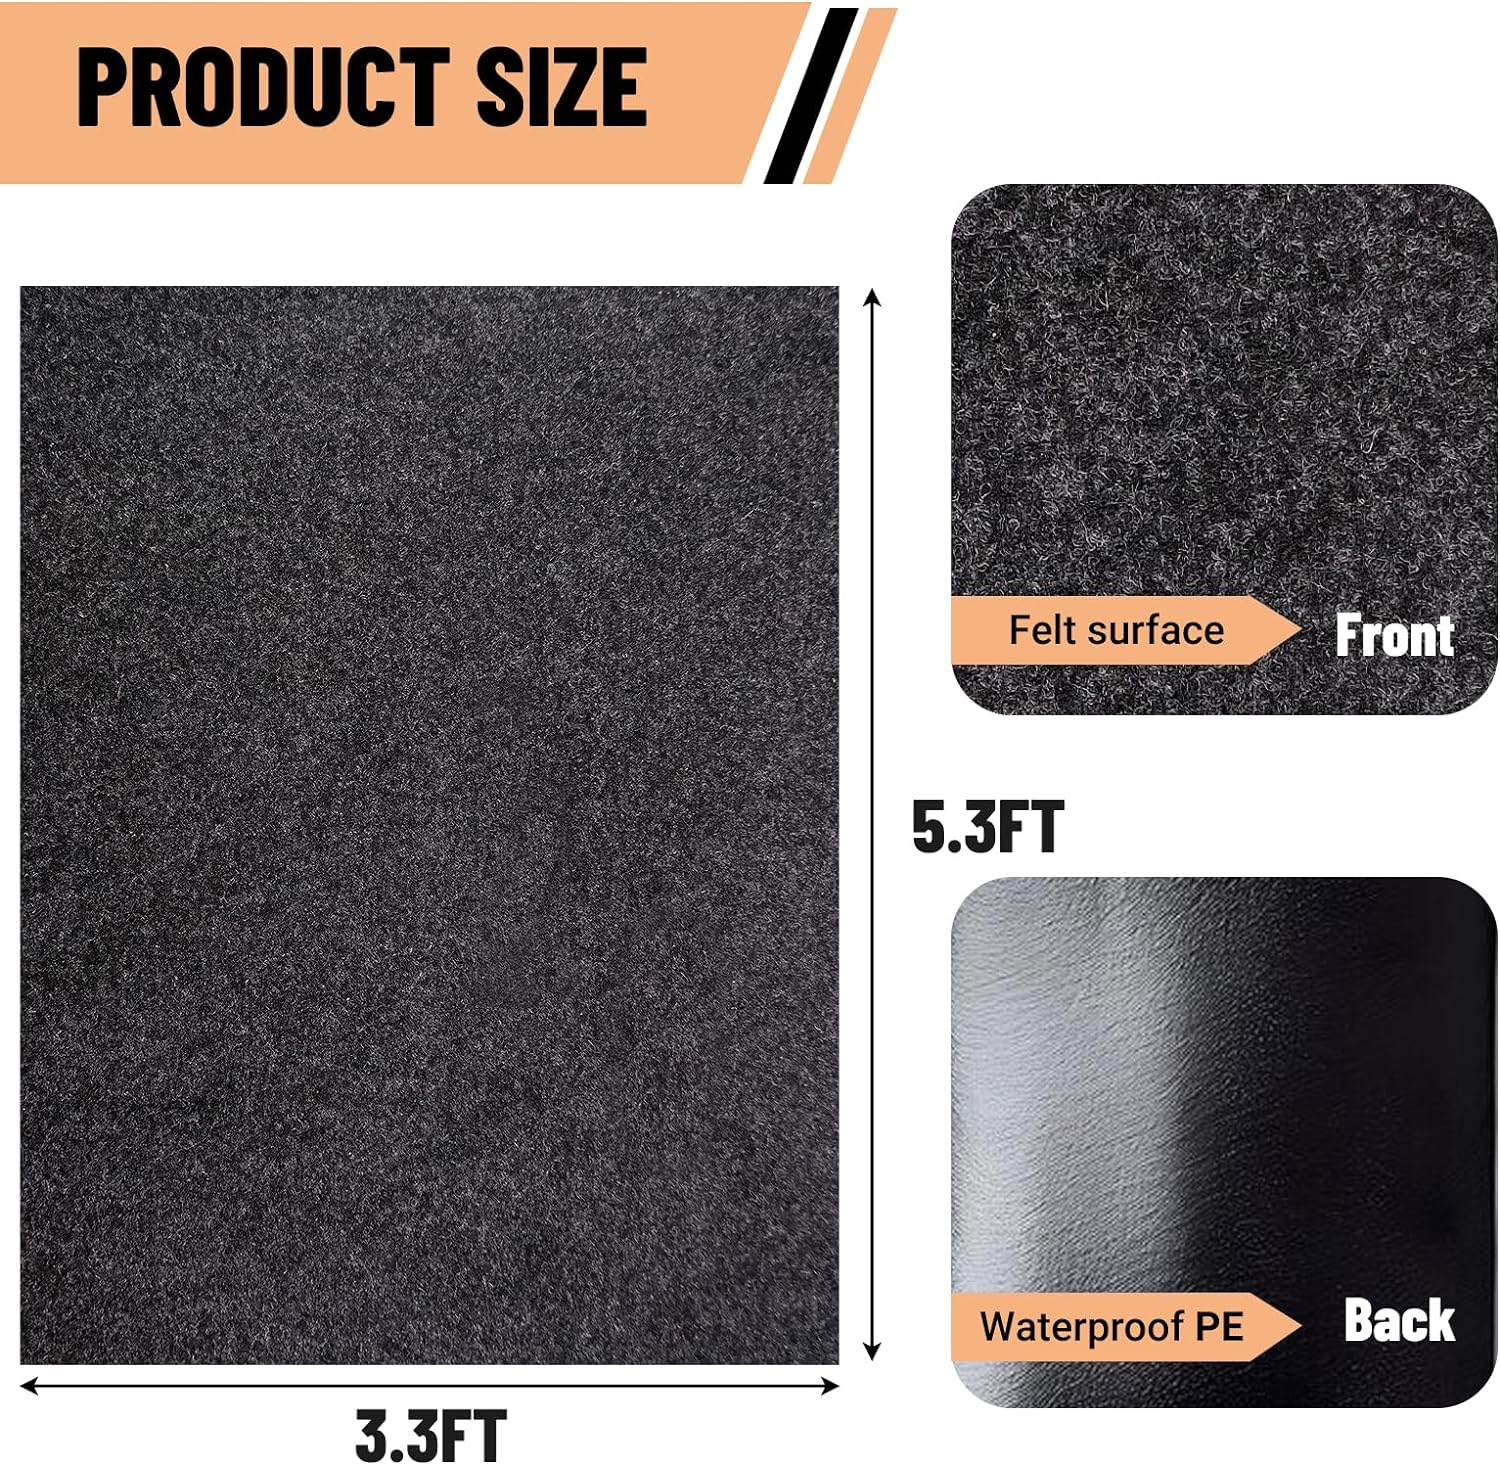 Waterproof Shed Mat Review